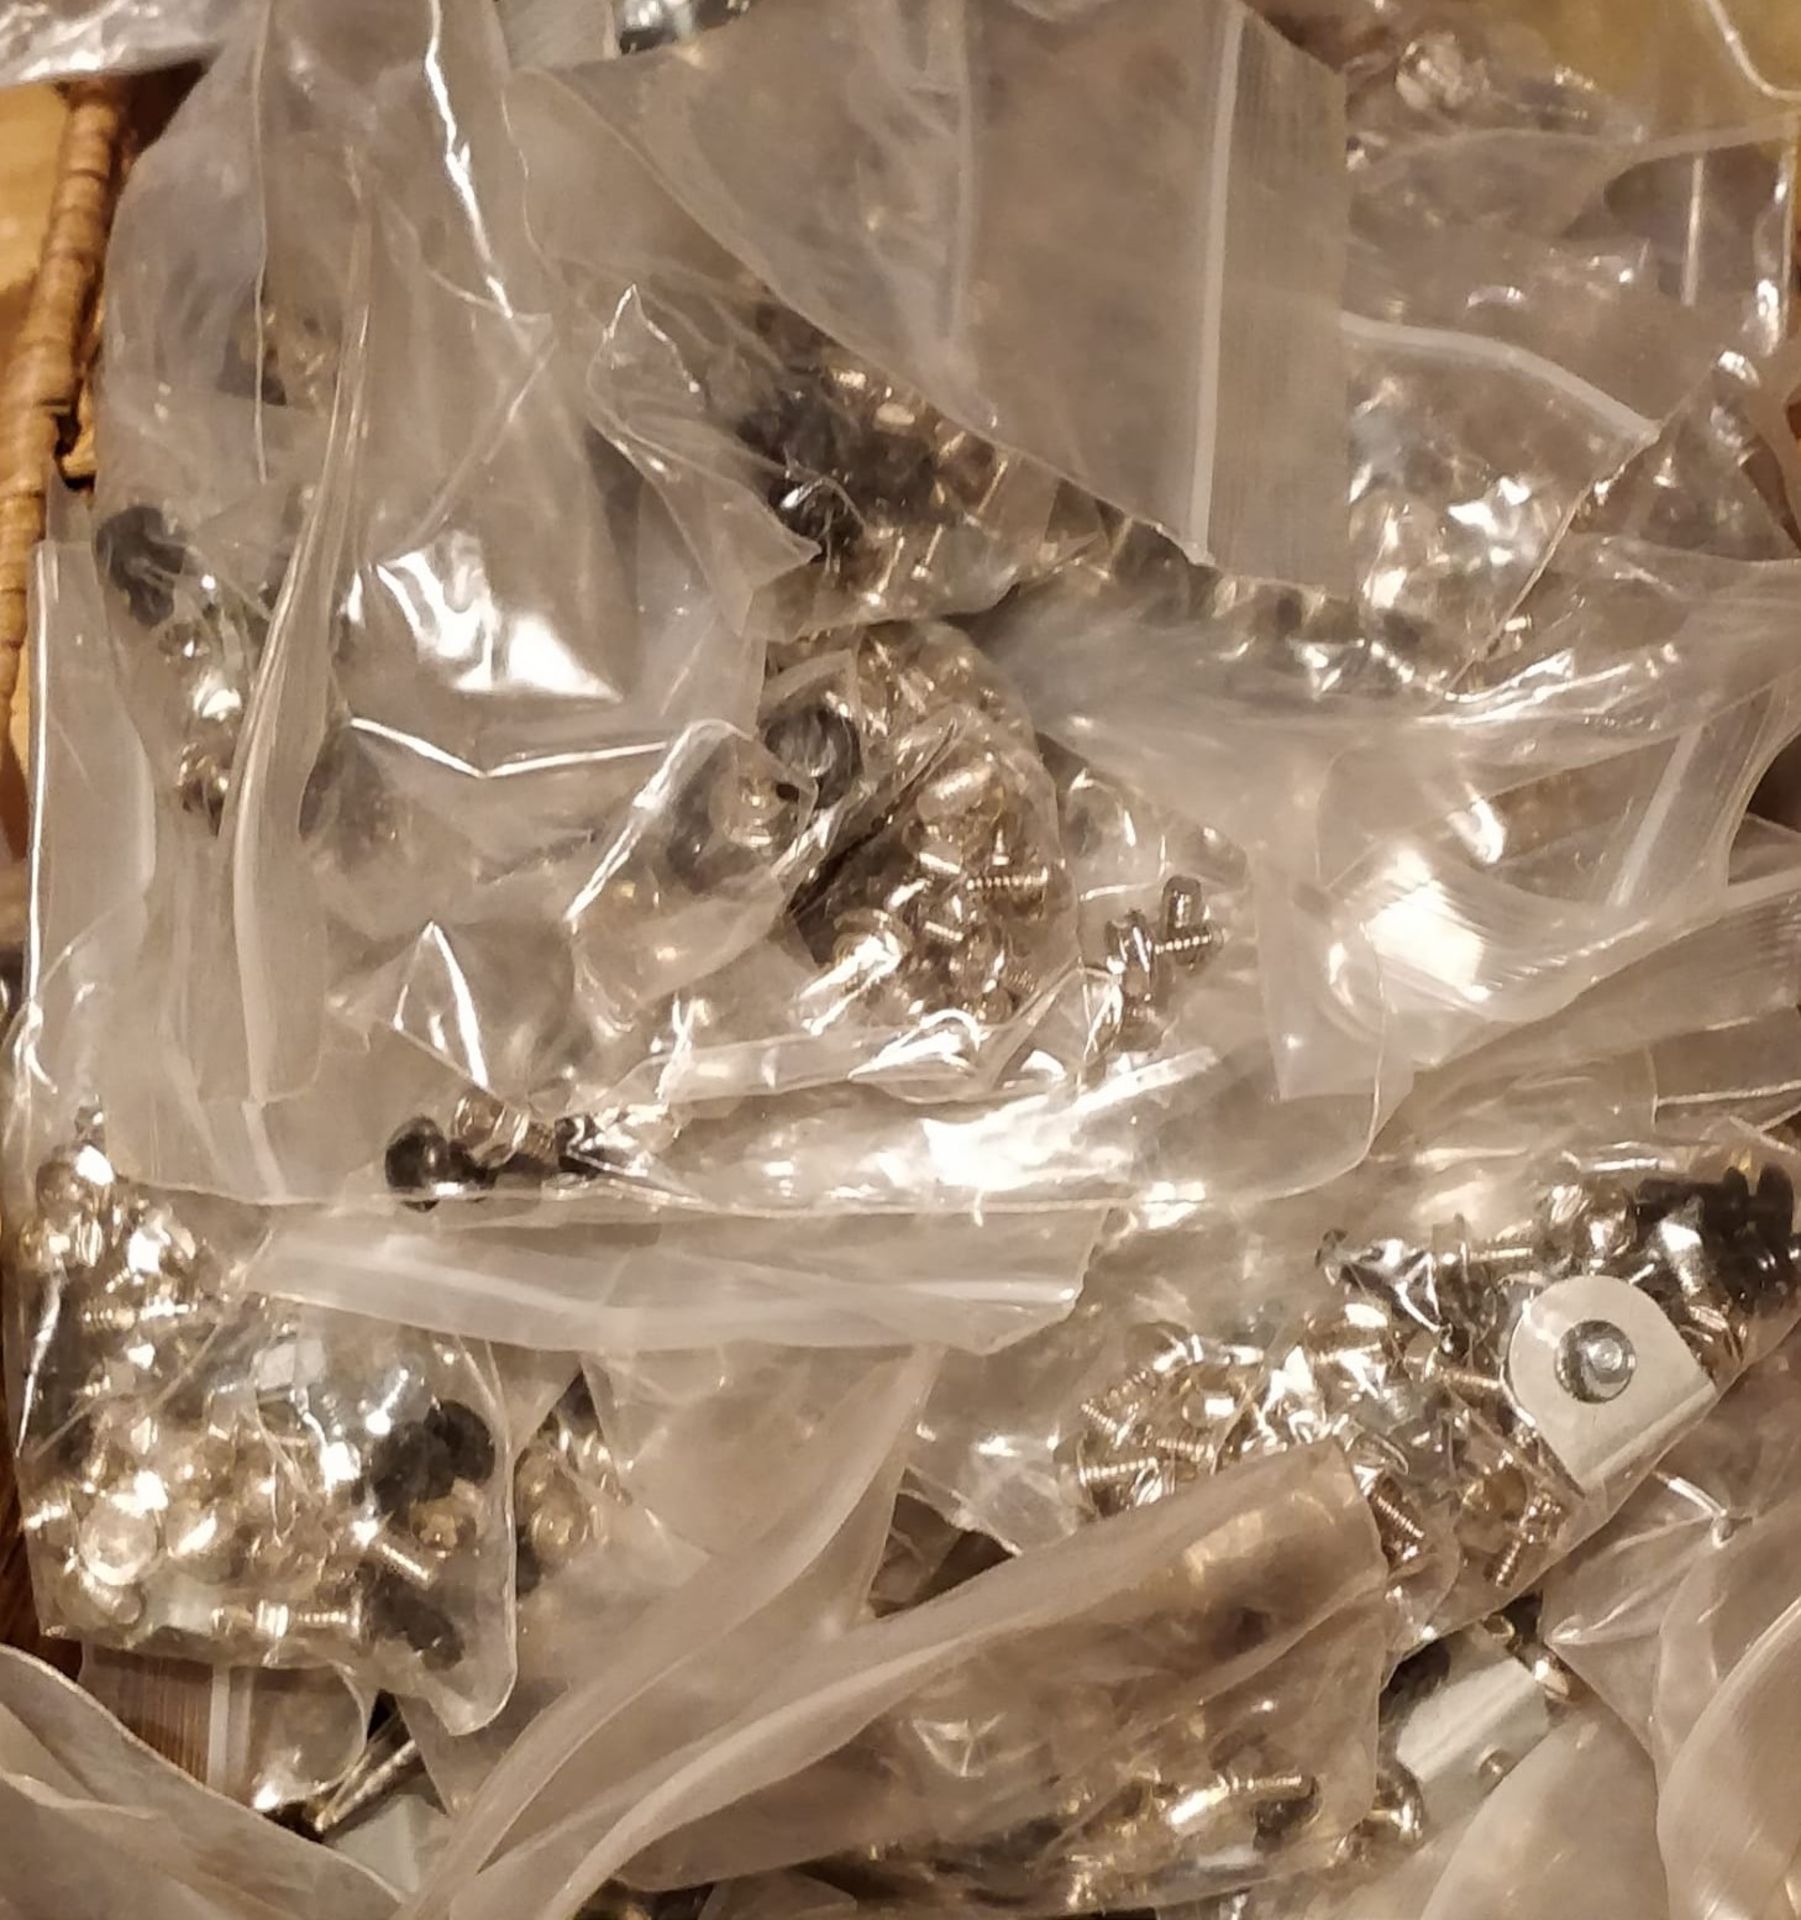 80 x PC Builders Screw Sets - Screw Sets For PC Building With Various Screws in Each Pack - Ref: - Image 2 of 3